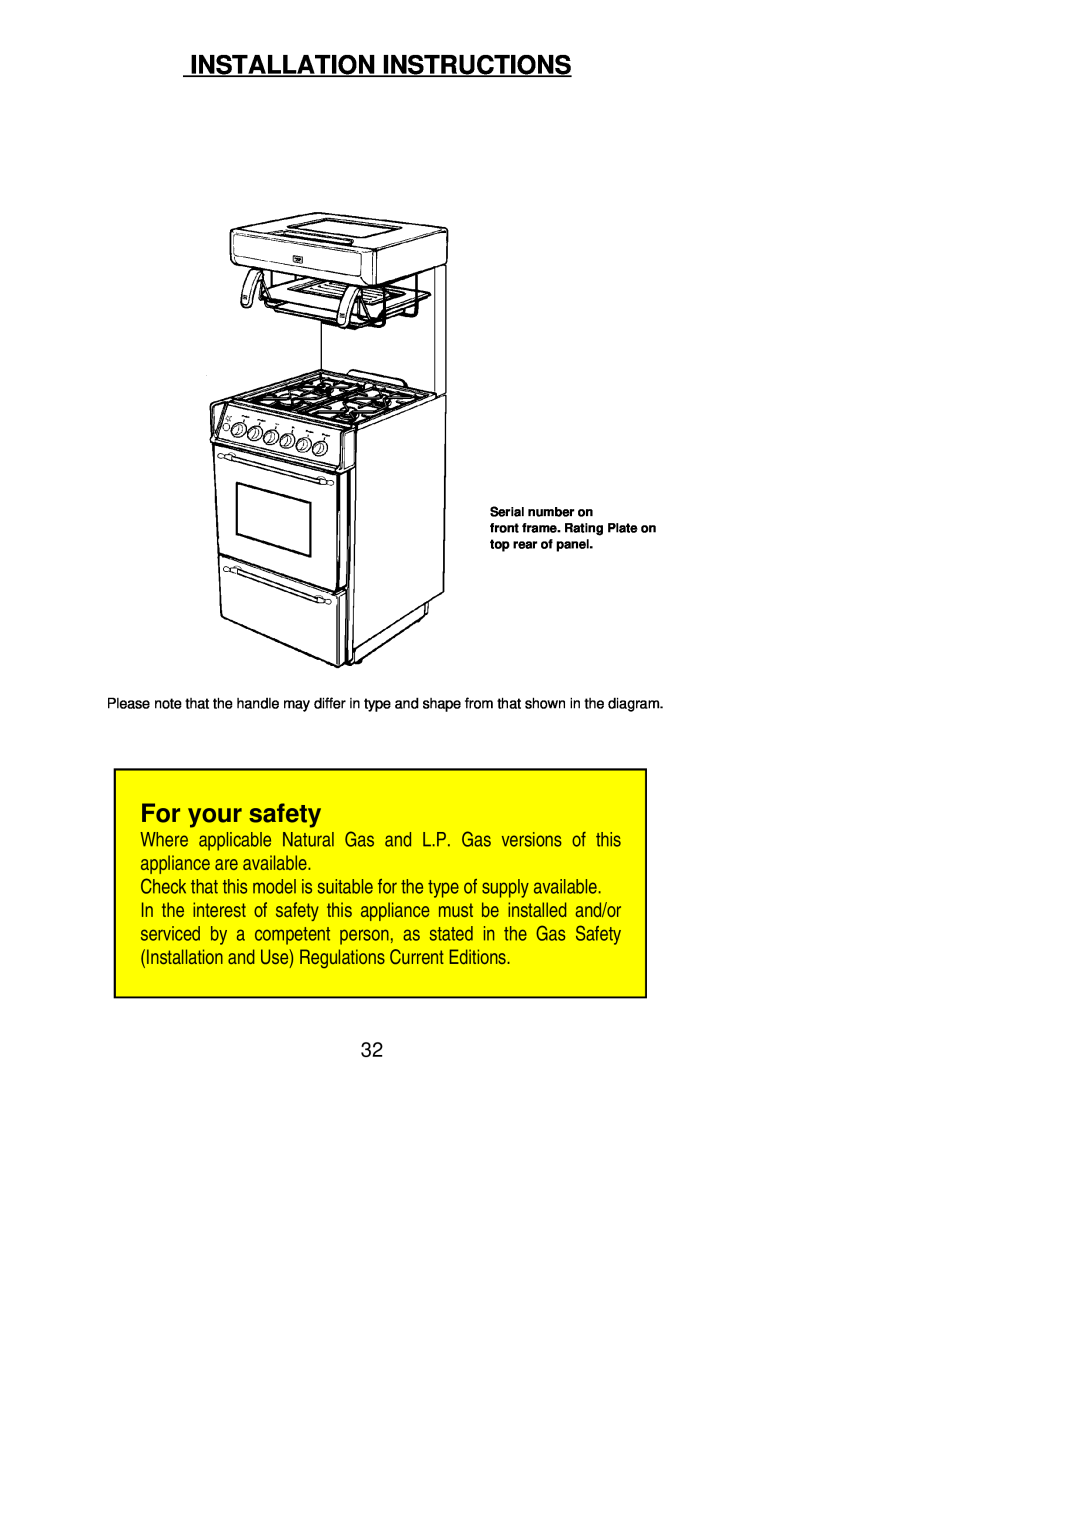 Electrolux 55V Installation Instructions, For your safety, Serial number on front frame. Rating Plate on top rear of panel 